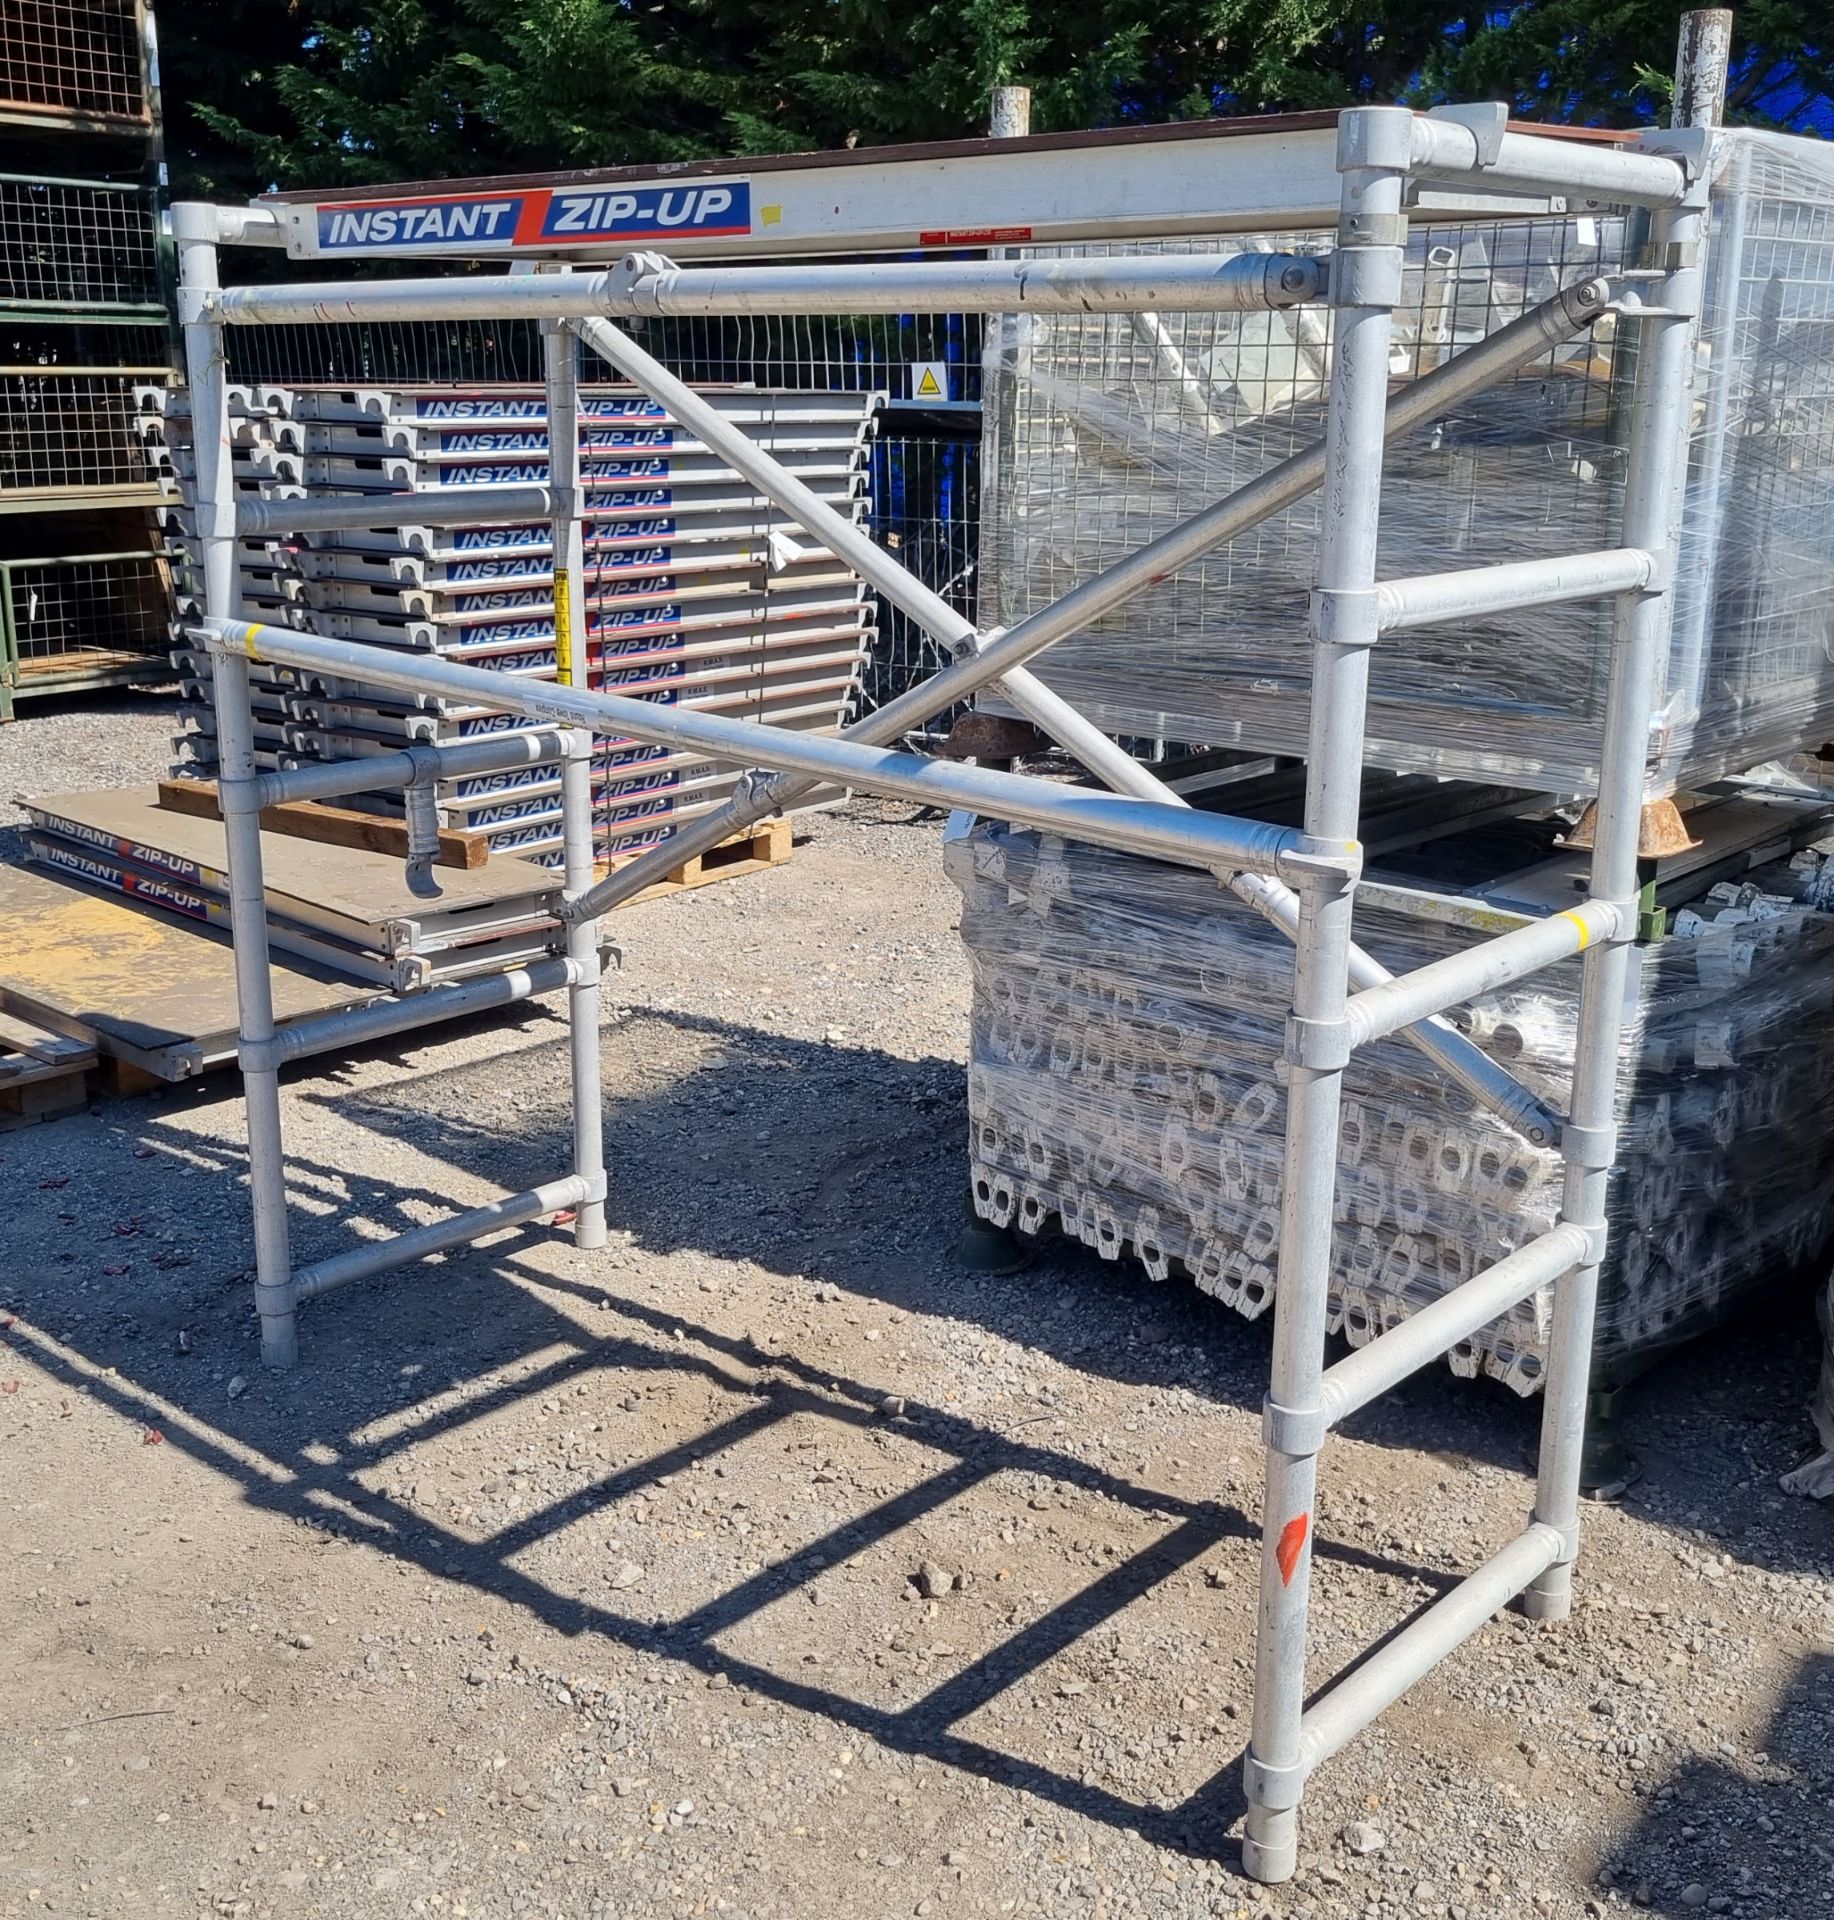 Scaffolding Tower Consisting of - Instant zip-up Scaffold tower platform L200 x W61 x H8.5cm, Instan - Image 2 of 4